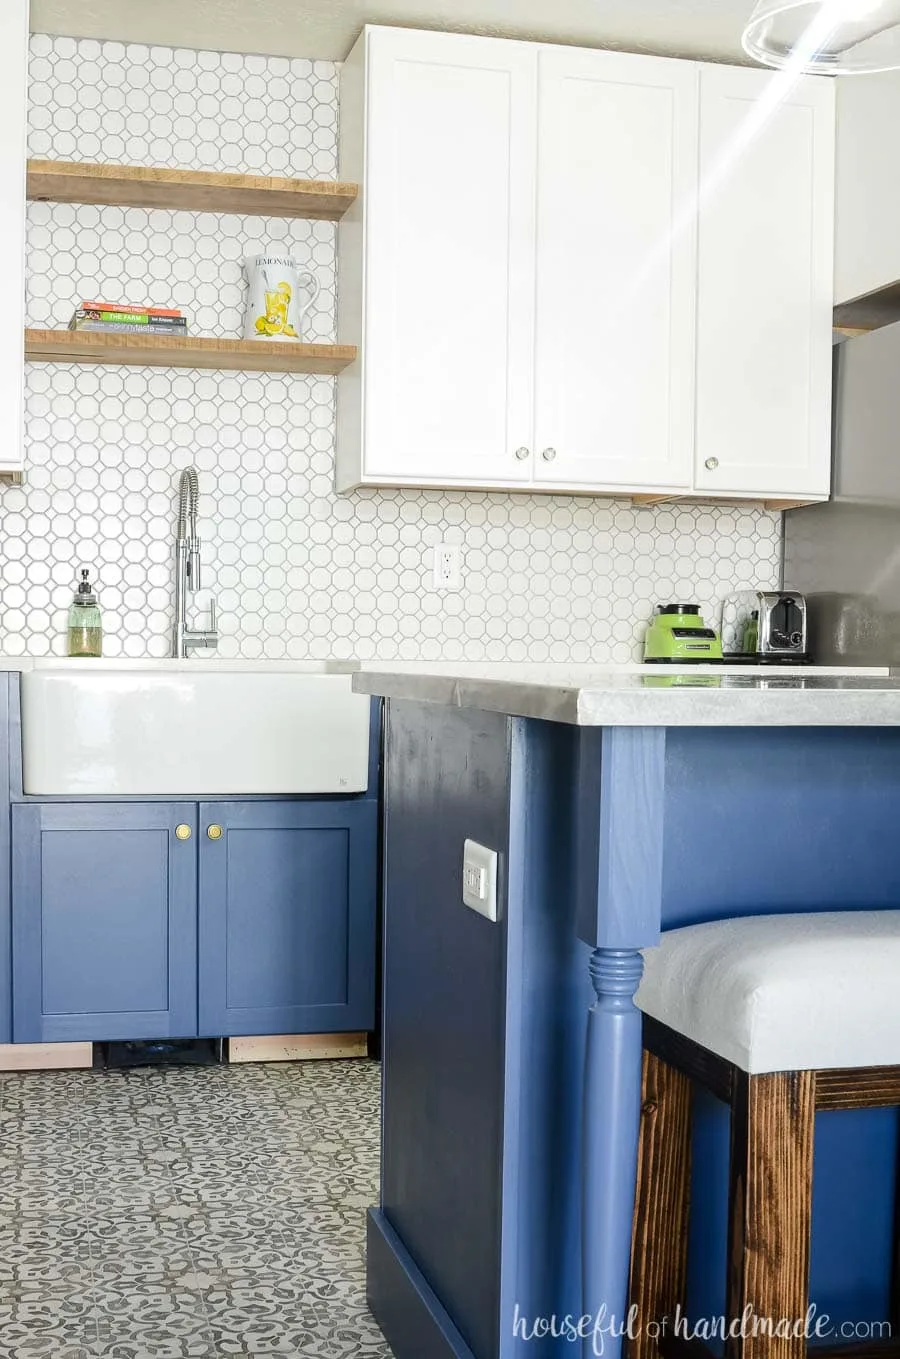 Gorgeous white and gray navy kitchen with textured white porcelain tile. Rustic floating shelves and a farmhouse sink are perfect for a budget farmhouse kitchen remodel. Housefulofhandmade.com